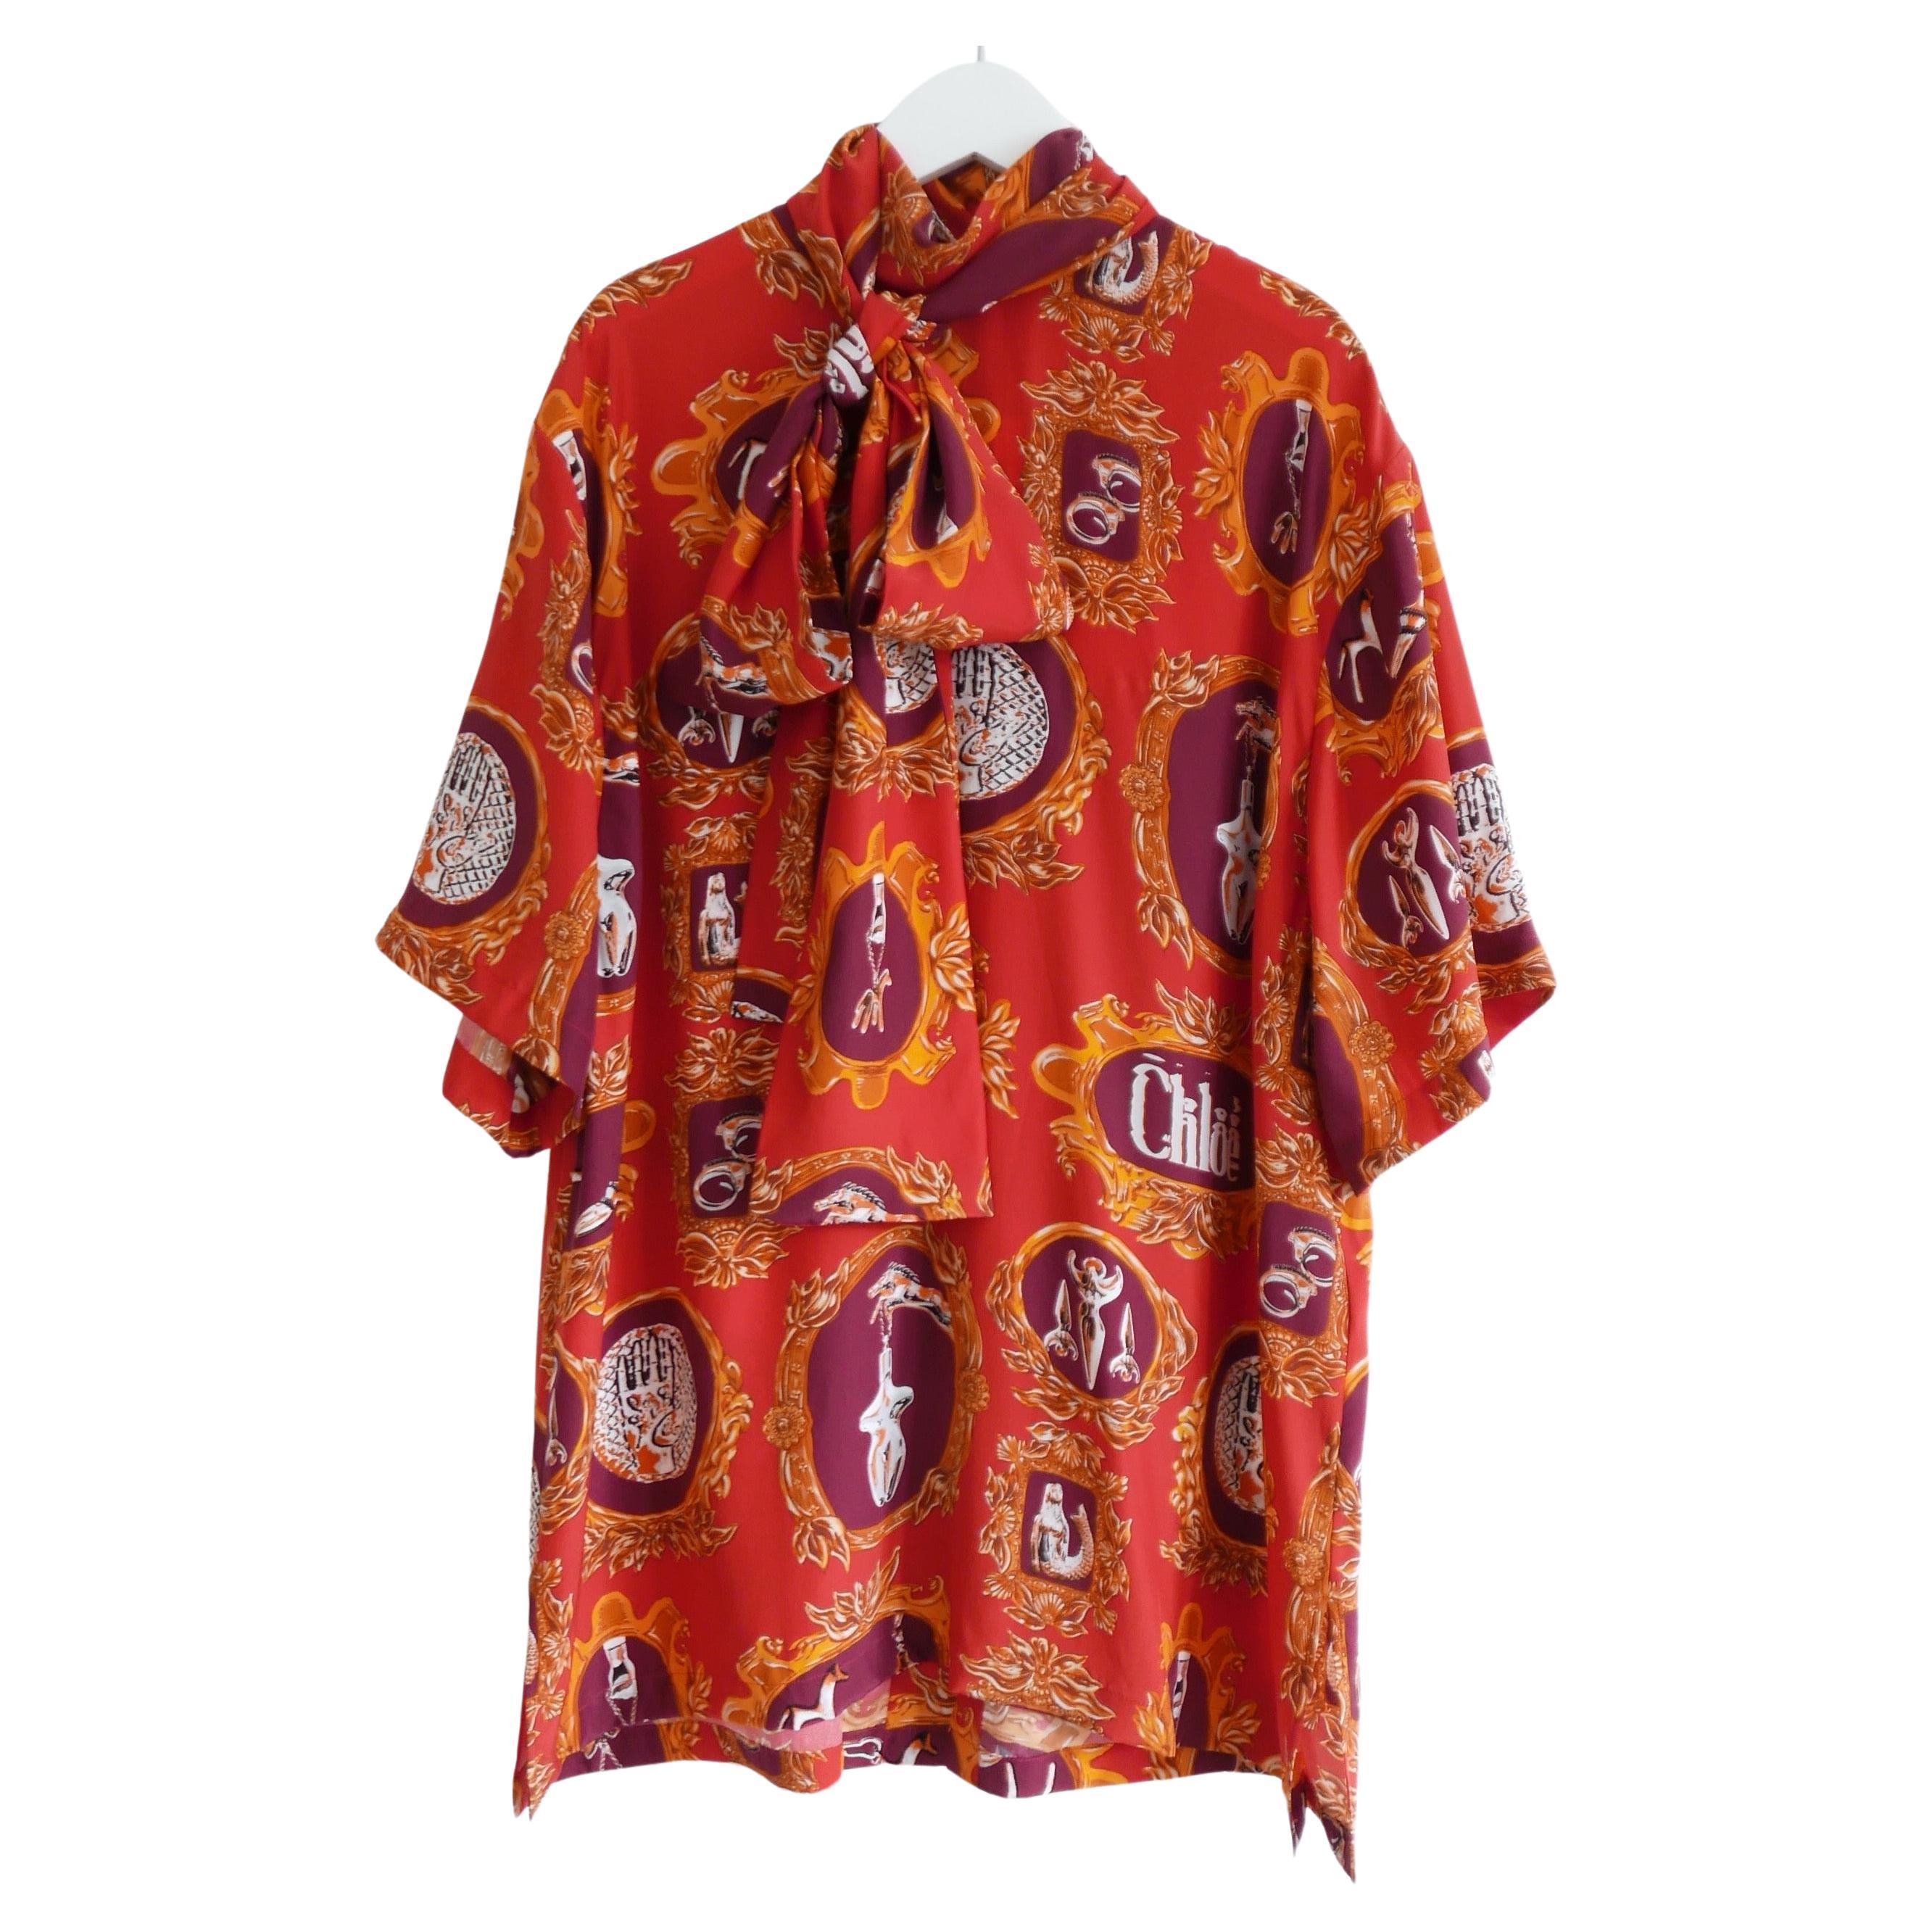 Chloe Pre-Fall 2019 Cameo Print Scarf Blouse For Sale